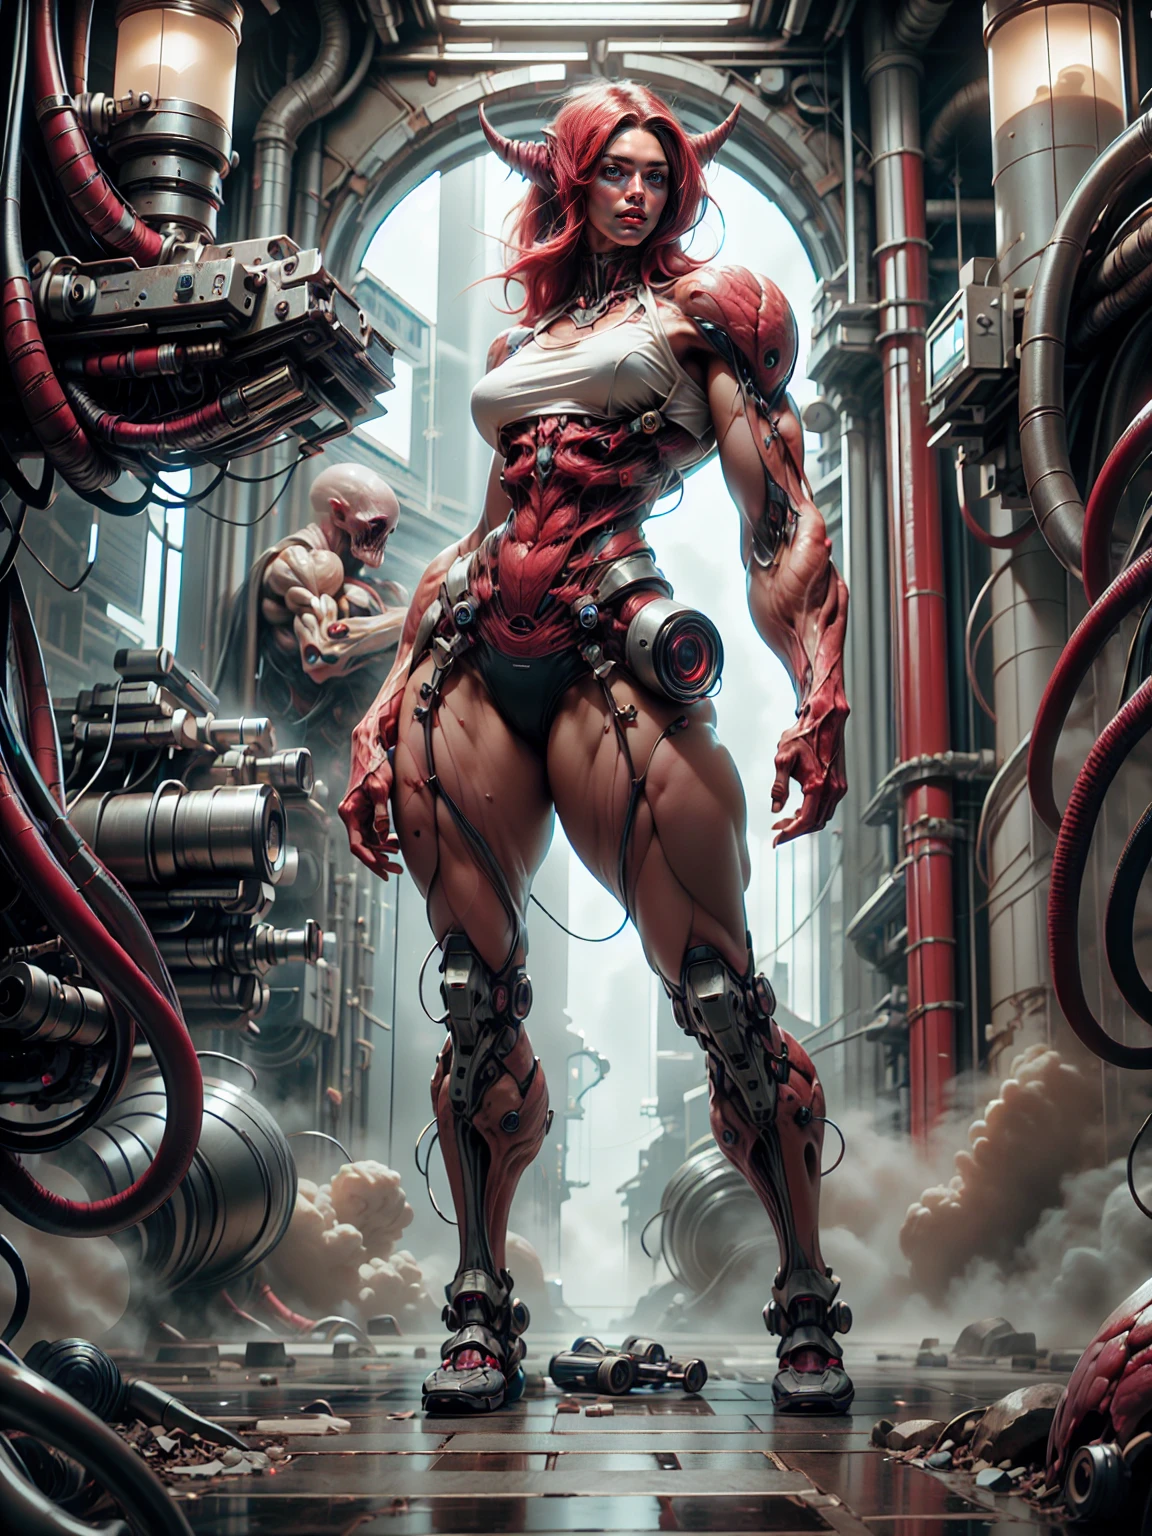 Cinematic, clear facial features and insanely detailed, the image captures the essence of (1 girl), (megan fox:1.25), (long red hair), (carnage skinless bio-mecha:1.25), (1 super muscular undead skinless succubus with gigantic horns:1.25), (covered in red necrotic skinless bio-mecha muscle:1.25), (exposed muscles & veins everywhere:1.25), (perfect fingers:1.25) (full body pose:1.25). The color grading is beautifully done, enhancing the overall cinematic feel. Unreal Engine makes her appearance even more mesmerizing. With depth of field (DOF), every detail is focused and accentuated, drawing attention to her eyes and hair. Peak image resolution utilizing super-resolution technology ensures pixel perfection. Cinematic lighting enhances her aura, while anti-aliasing techniques like FXAA and TXAA keep the edges smooth and clean. Adding realism to the muscular bio-mecha succubus , RTX technology enables ray tracing. Additionally, SSAO (Screen Space Ambient Occlusion) gives depth and realism to the scene, the girl's presence even more convincing. In the post-processing and post-production stages, tone mapping enhances the colors, creating a captivating visual experience. The integration of CGI (Computer-Generated Imagery) and VFX (Visual Effects brings out her demonic features seamlessly . Incredible level of detail, with intricate elements meticulously crafted, the artwork hyper maximalist and hyper-realistic. Volumetric effects add depth and dimension, with unparalleled photorealism. 8k resolution rendering ensures super detailed visuals. The volumetric lighting adds a touch of magic, highlighting her beauty and aura in an otherworldly way. High Dynamic Range (HDR) tech makes the colors pop, adding richness to the overall composition. Ultimately, this artwork presents an unreal, yet stunningly real portrayal of an incredibly beautiful bio-mecha succubus girl. The sharp focus ensures that every feature is crisply defined, creating a captivating presence. (girl face:1.45)